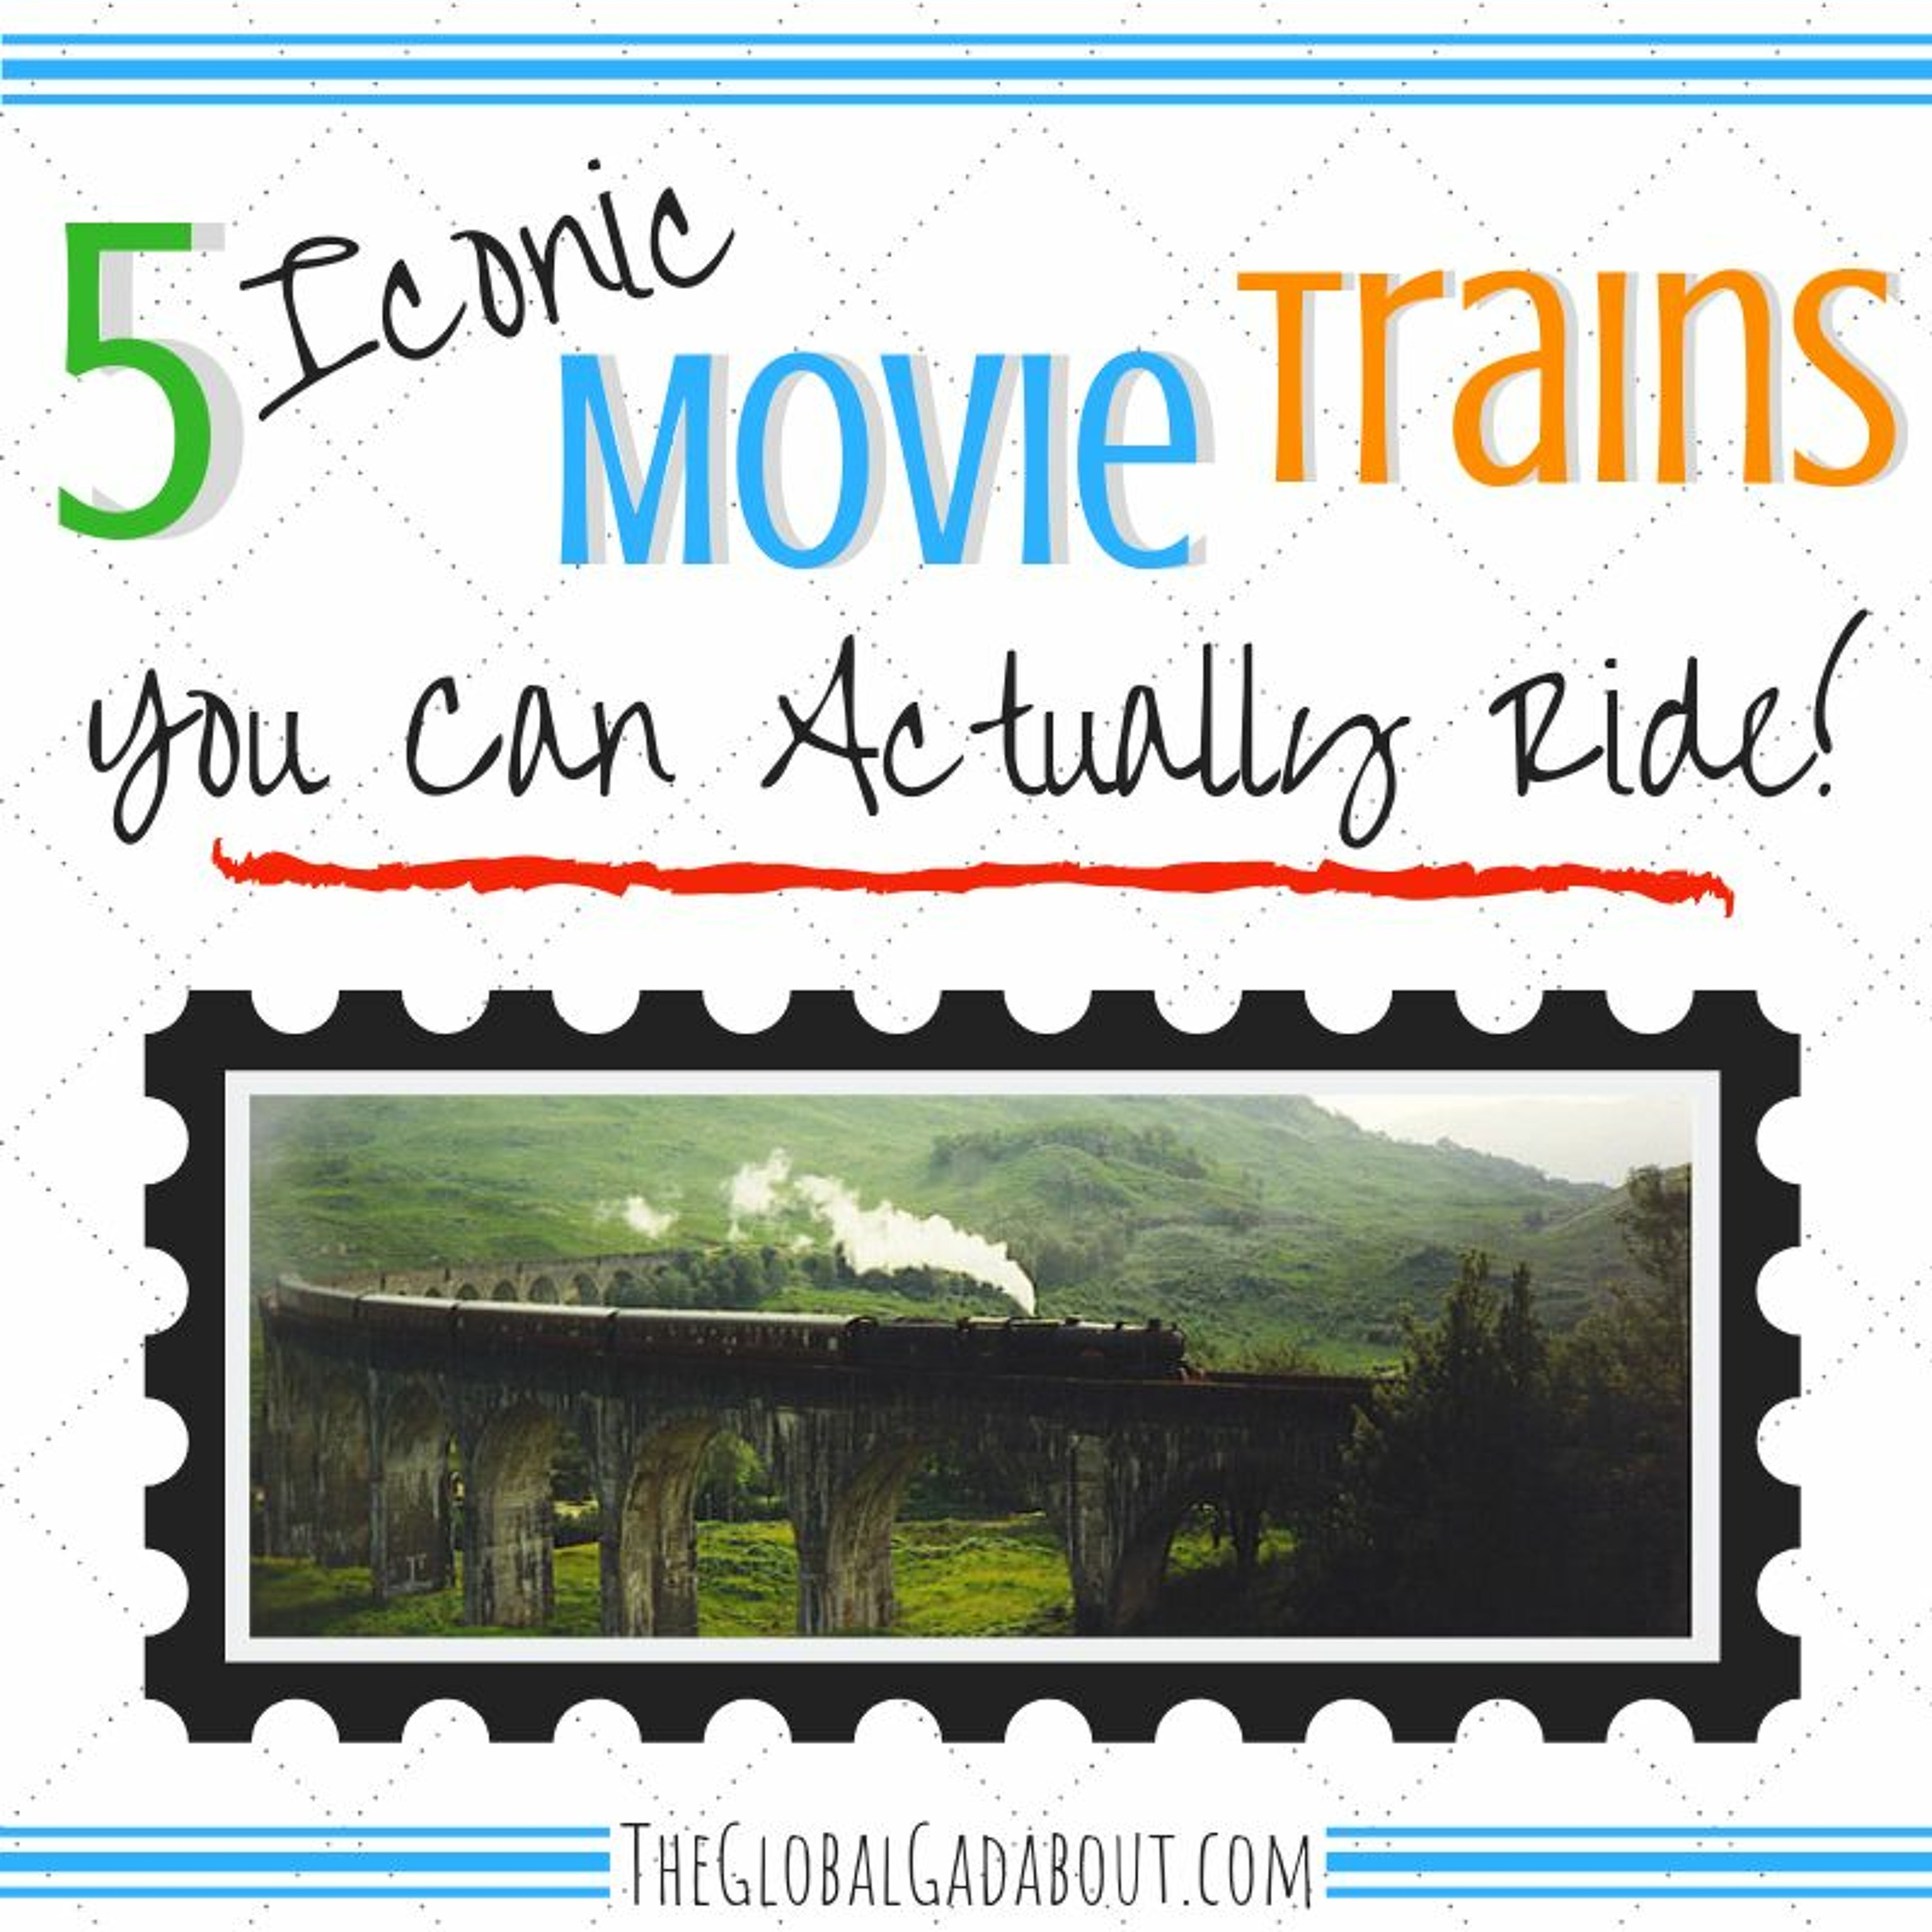 5 Iconic Movie Trains You Can Actually Ride